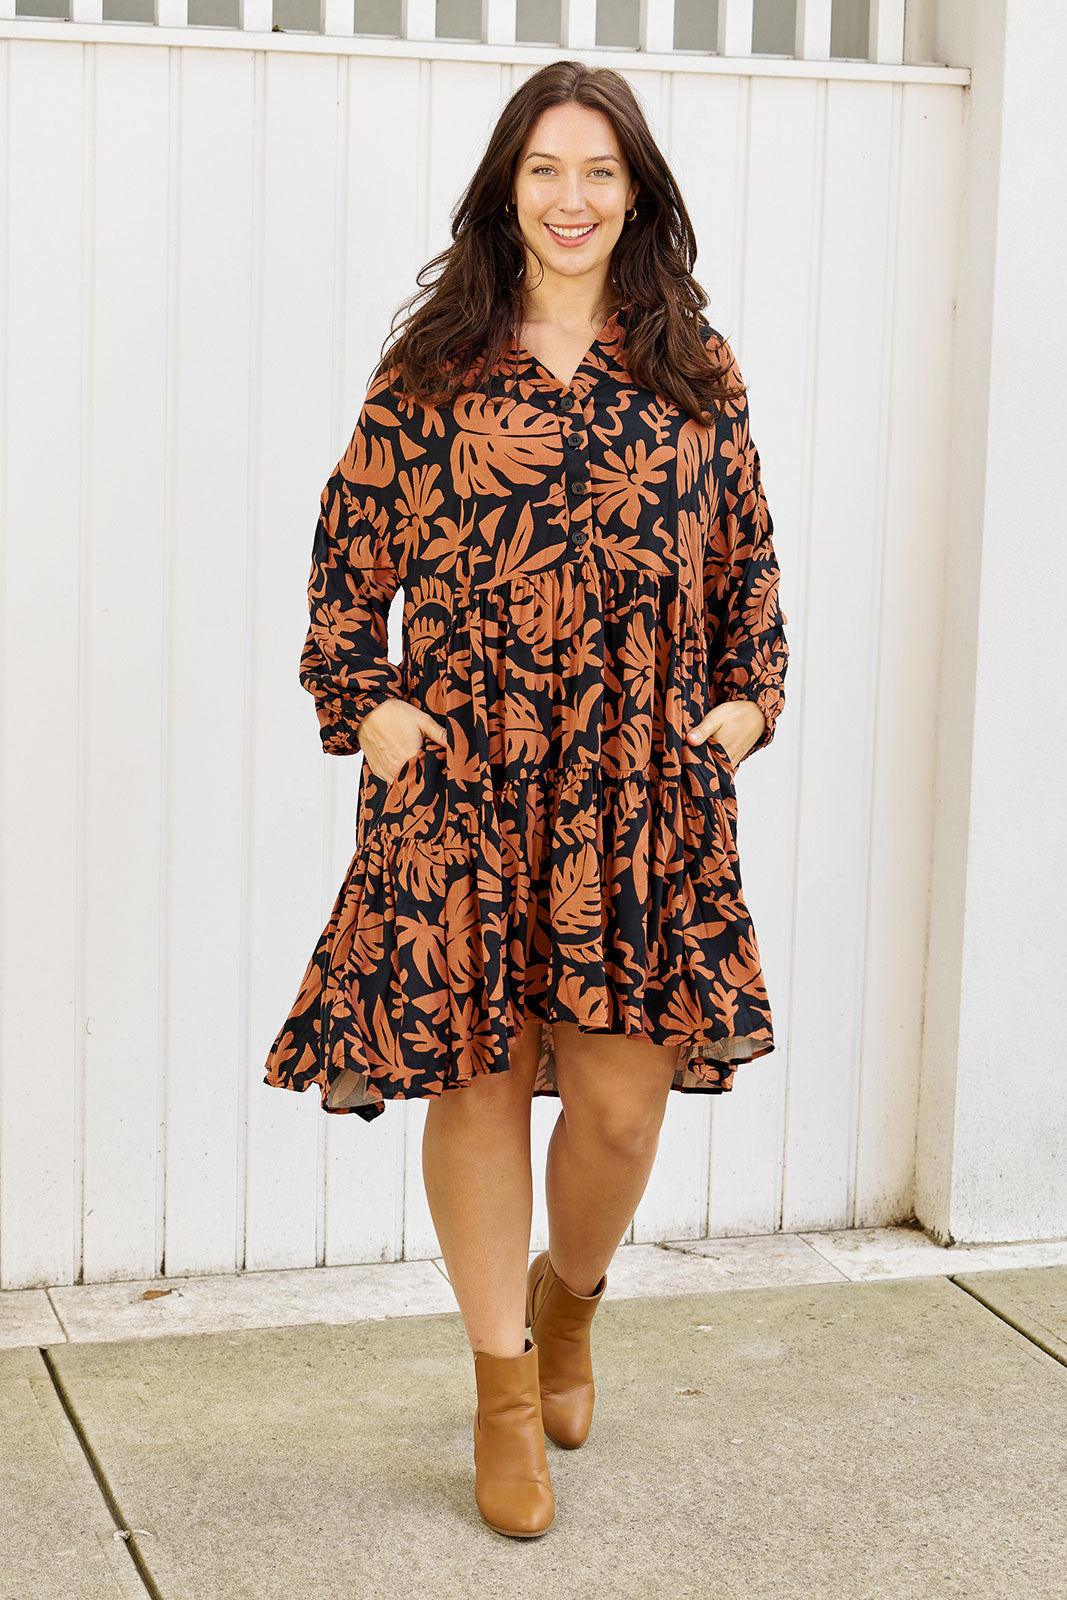 Revamp Your Wardrobe With These Pretty Floral Dresses Online – amoshi.in